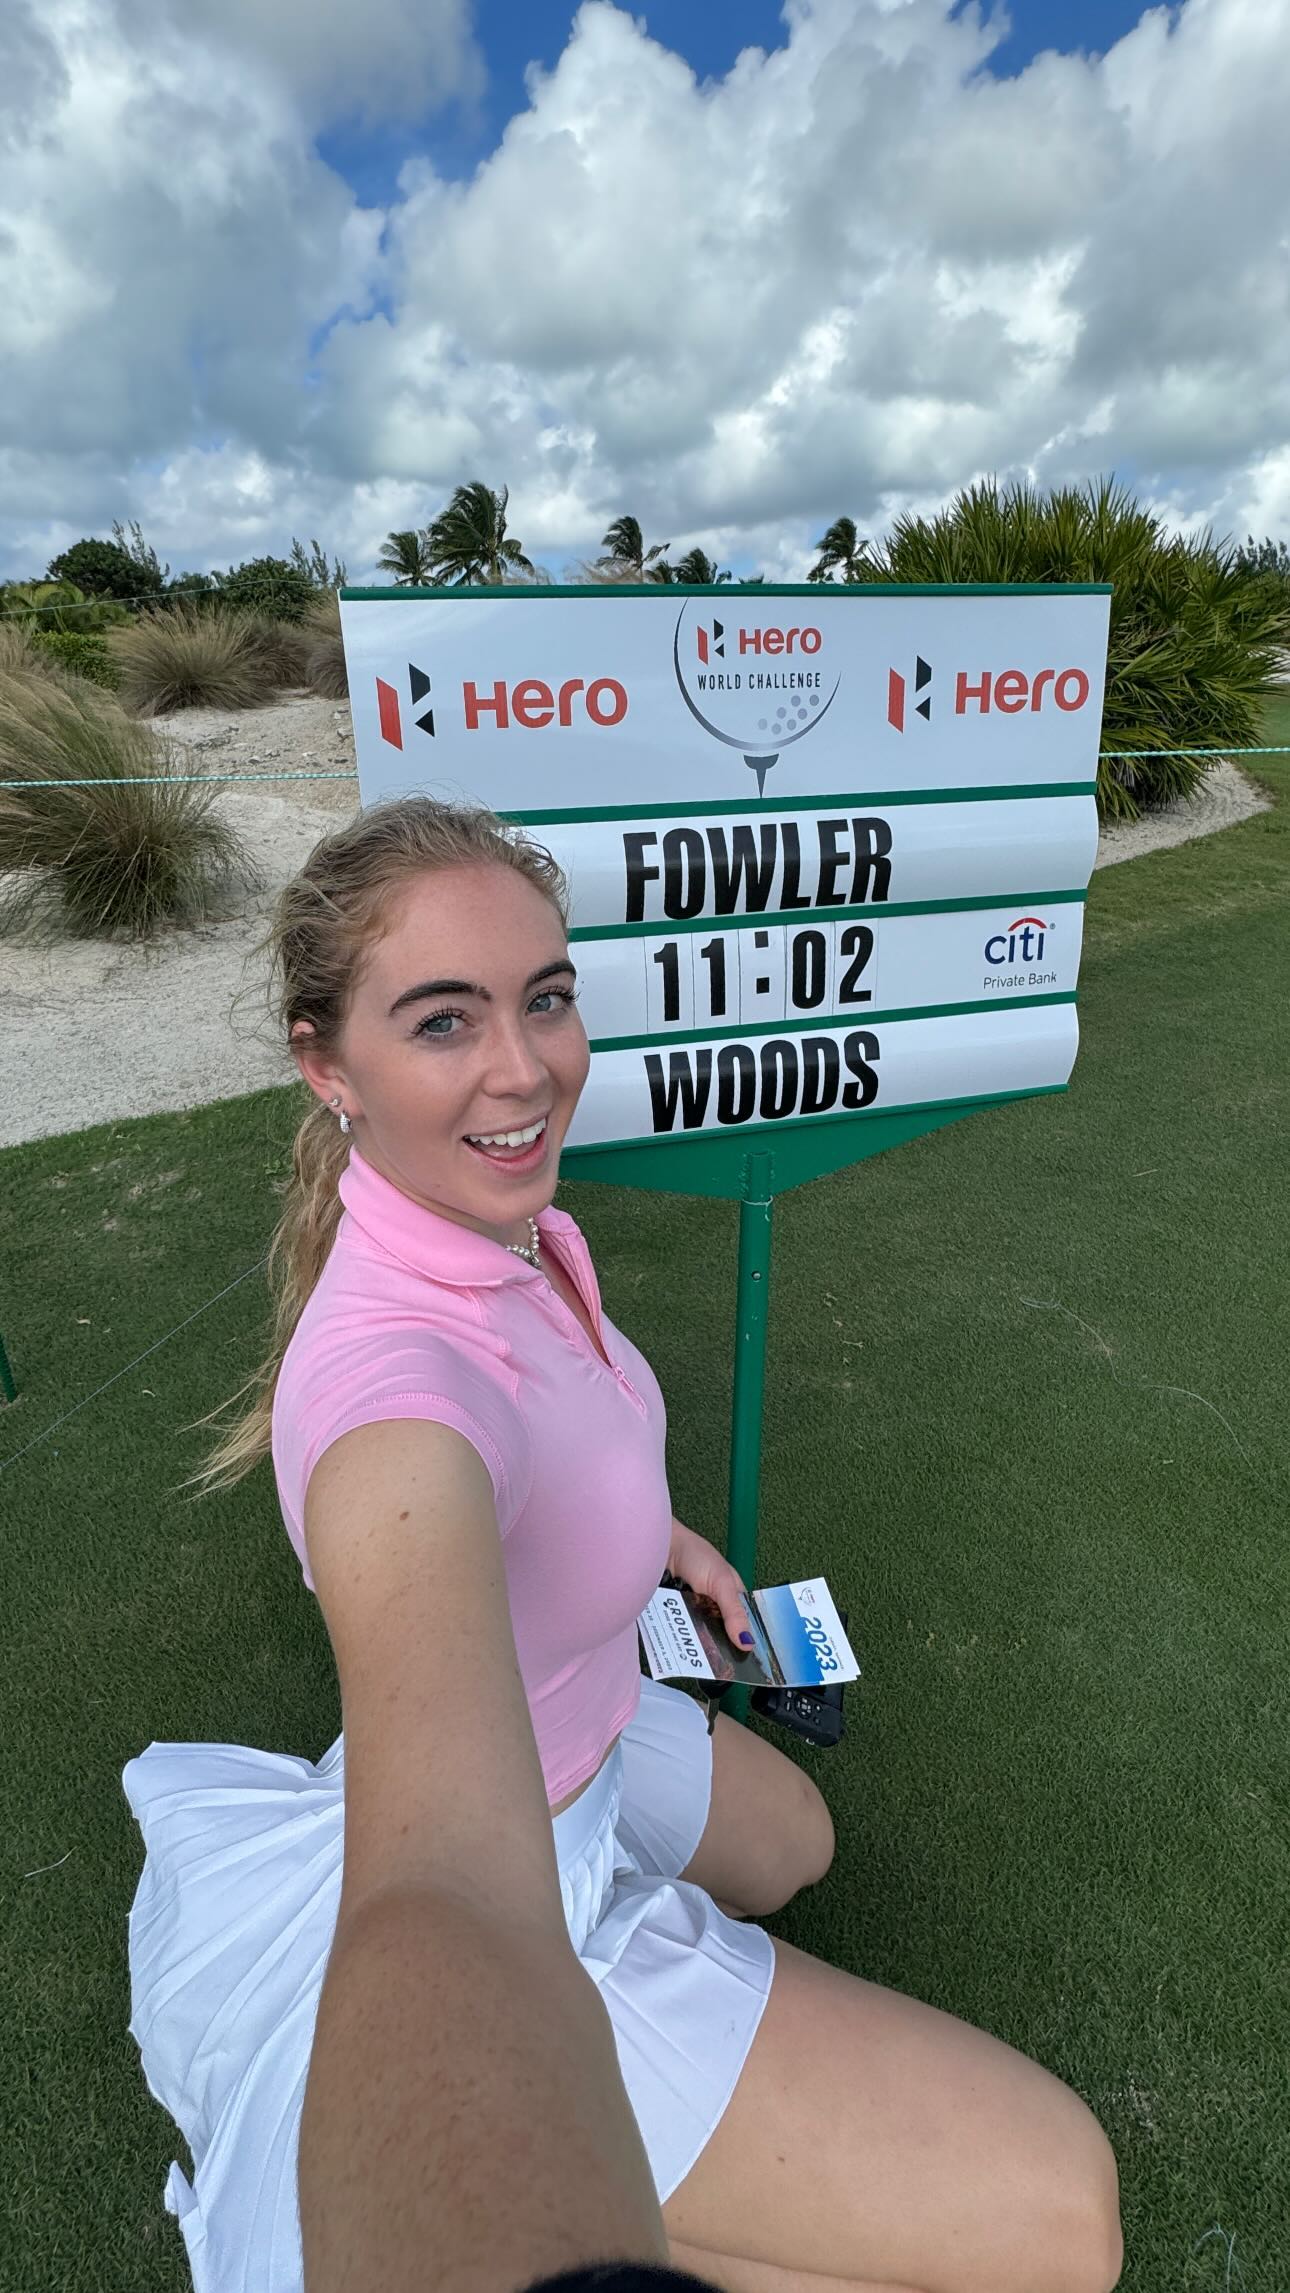 Grace also went to the Hero World Challenge golf tournament at the Albany Golf Club and was able to see the legend Tiger Woods play